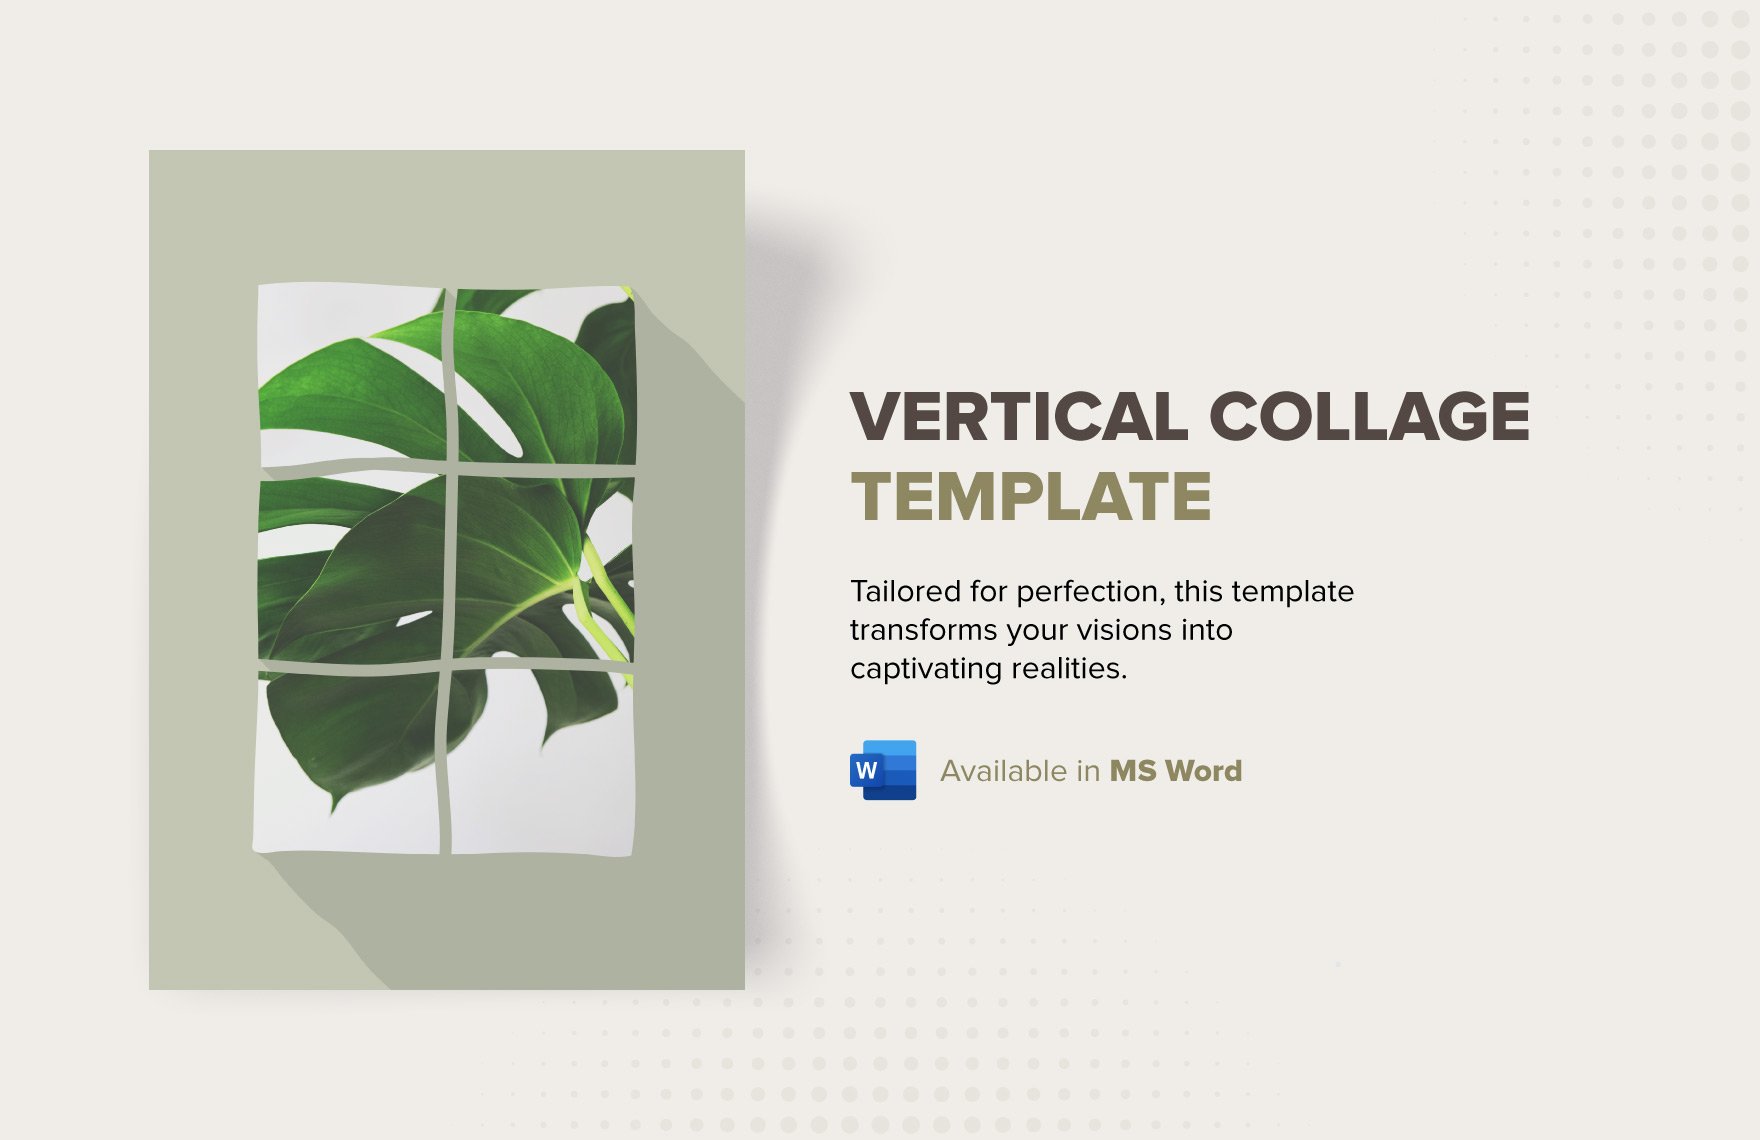 Vertical Collage Template